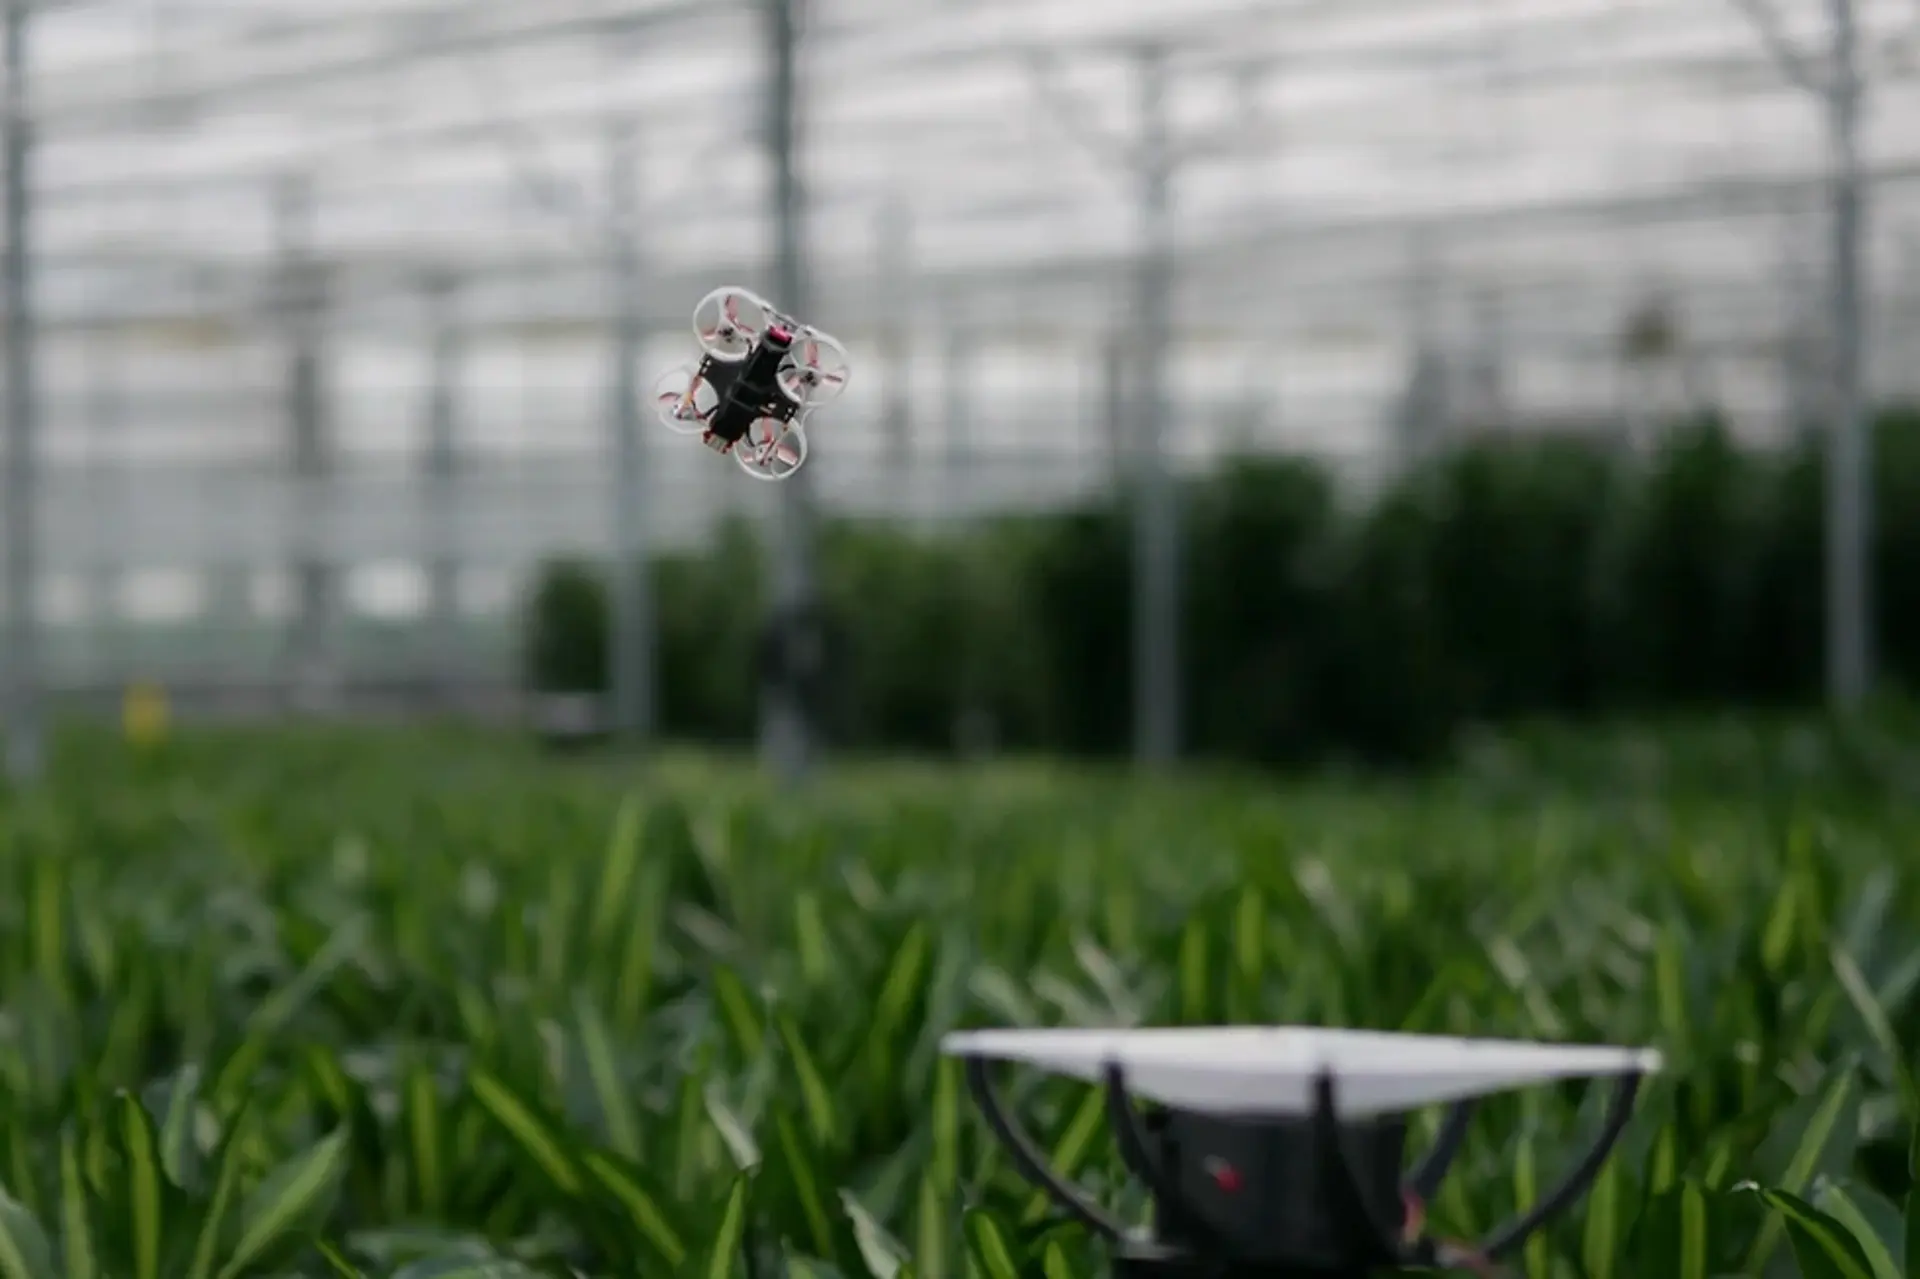 Dutch engineers want to exterminate insects in greenhouses using drones, IR cameras and artificial intelligence